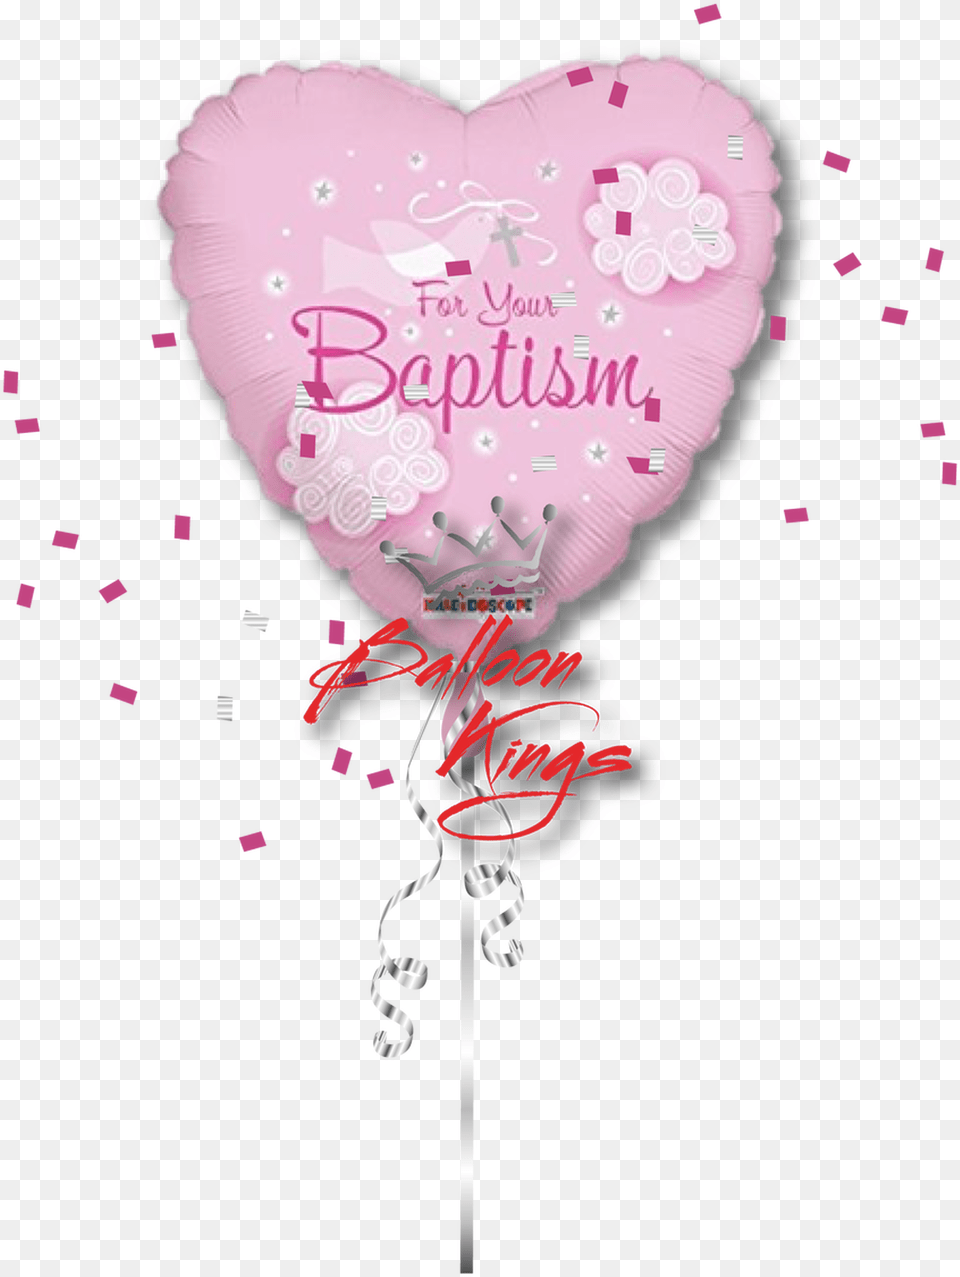 For Your Baptism Girl Portable Network Graphics, Person, Balloon Png Image